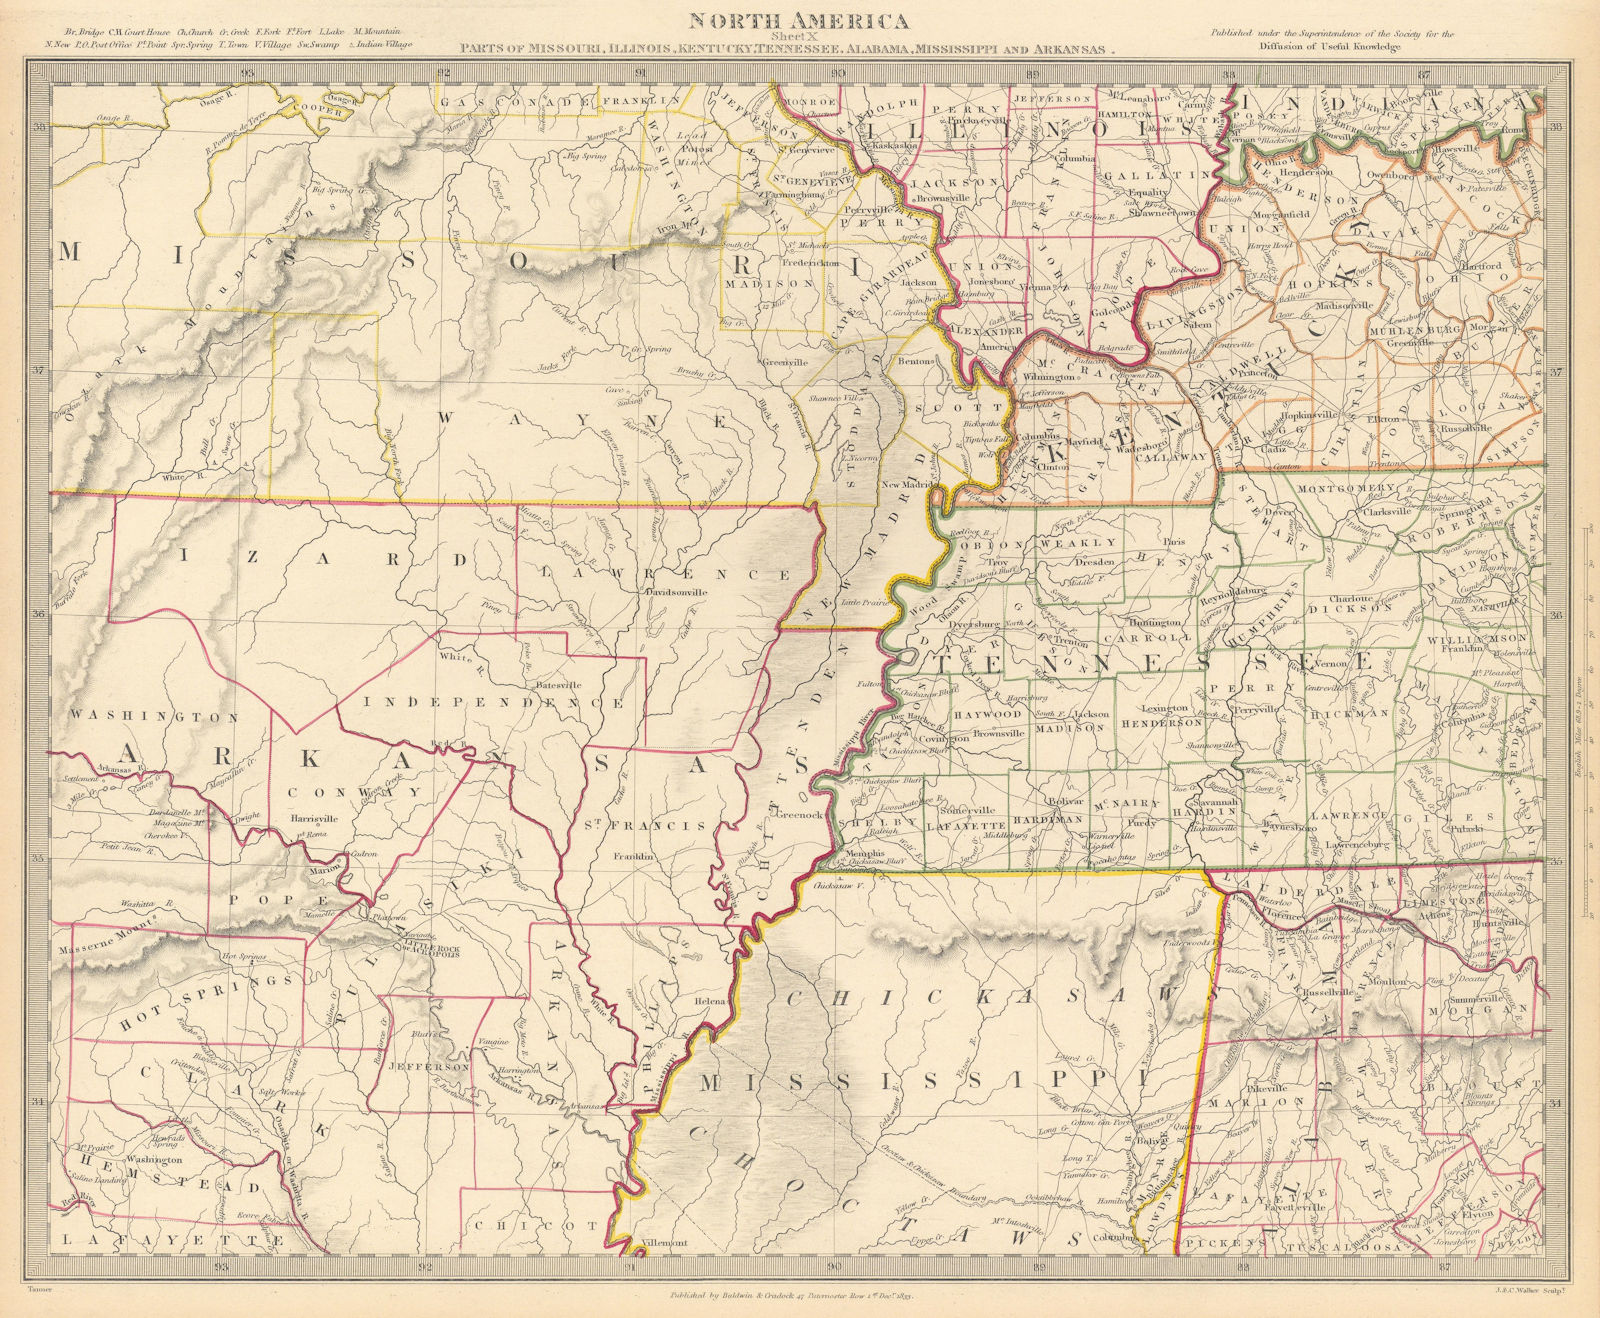 USA. AR MO TN MS IL IN KY AL. Choctaw Chickasaw boundaries. SDUK 1844 old map